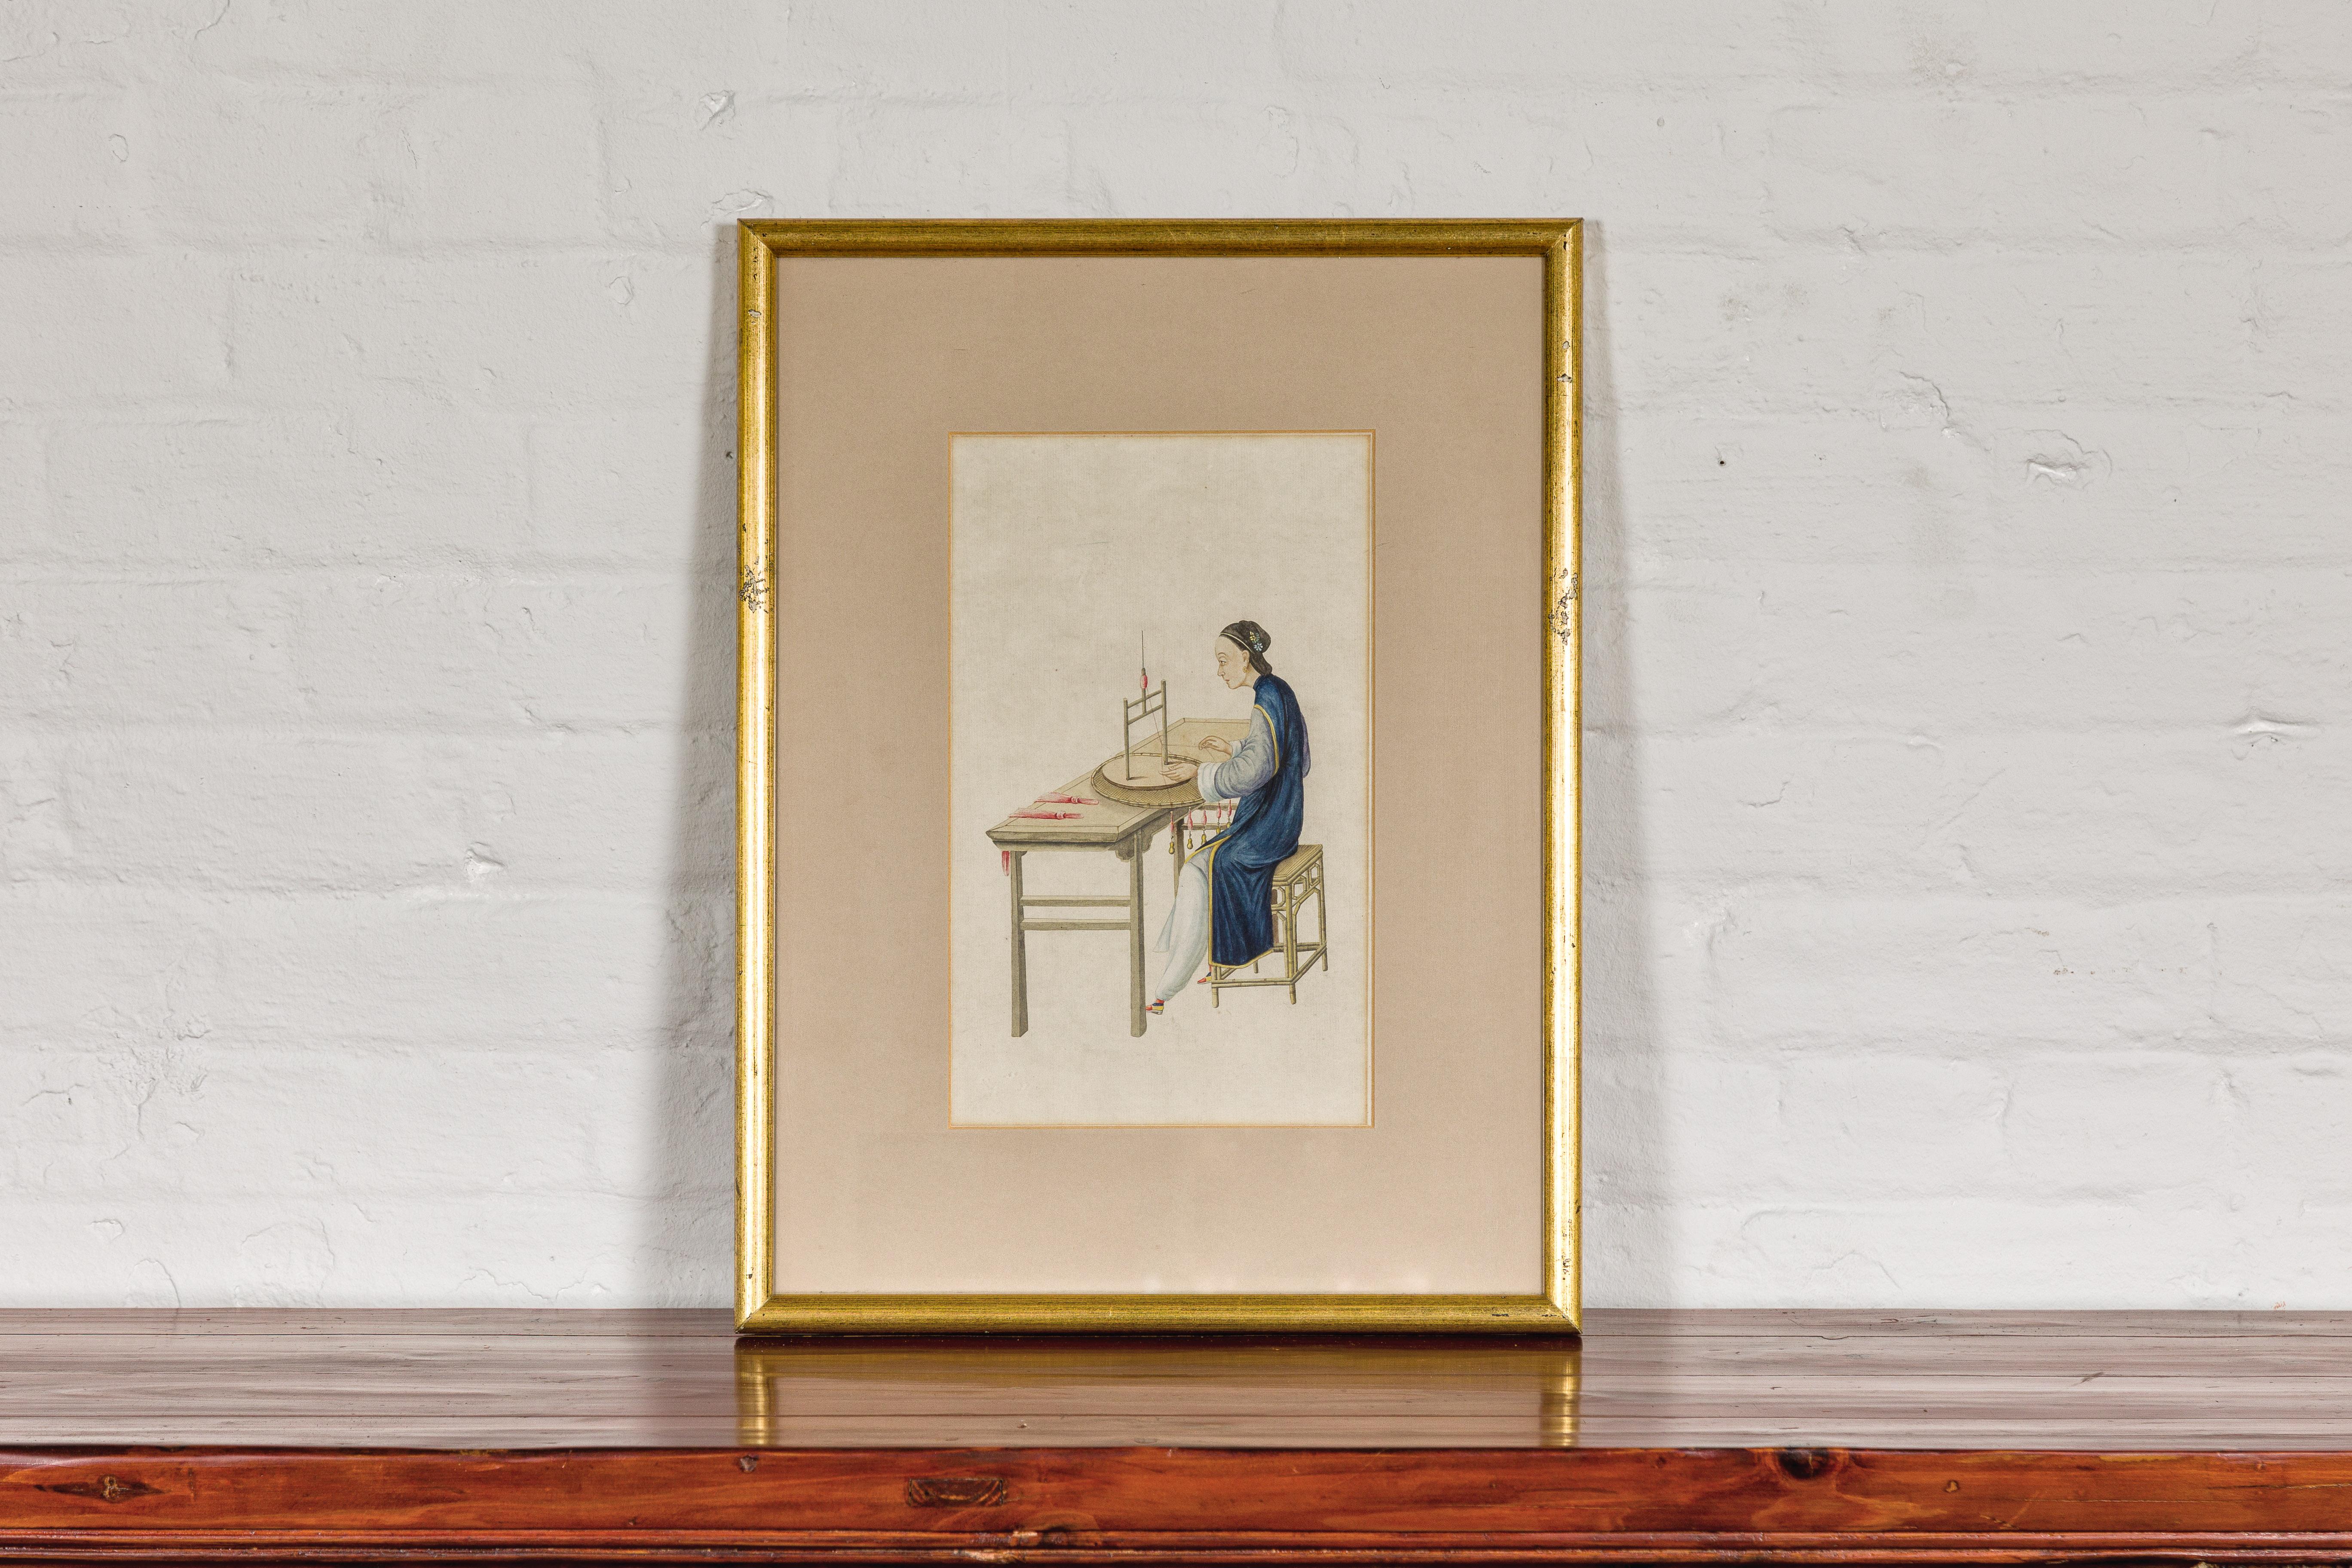 A vintage watercolor on paper depicting a woman in a blue dress threading silk, in gilded wood frame. Discover tranquility and minimalist beauty with this vintage Chinese watercolor, capturing a serene moment of a woman in a blue dress engaged in